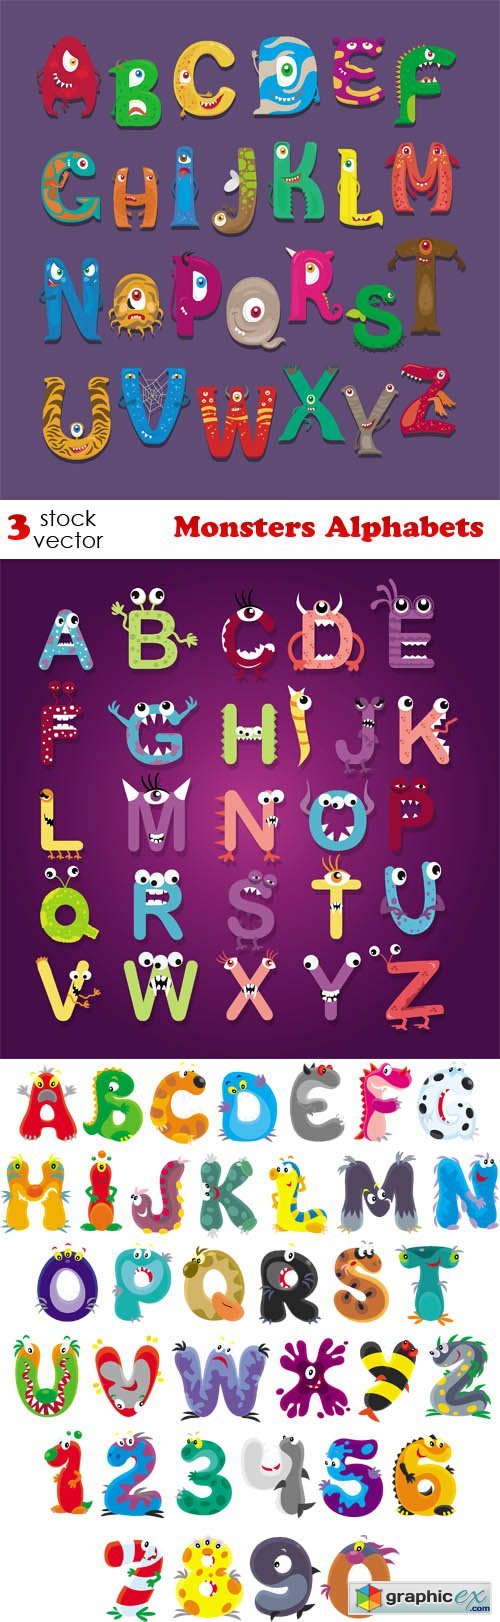 Monsters Alphabets